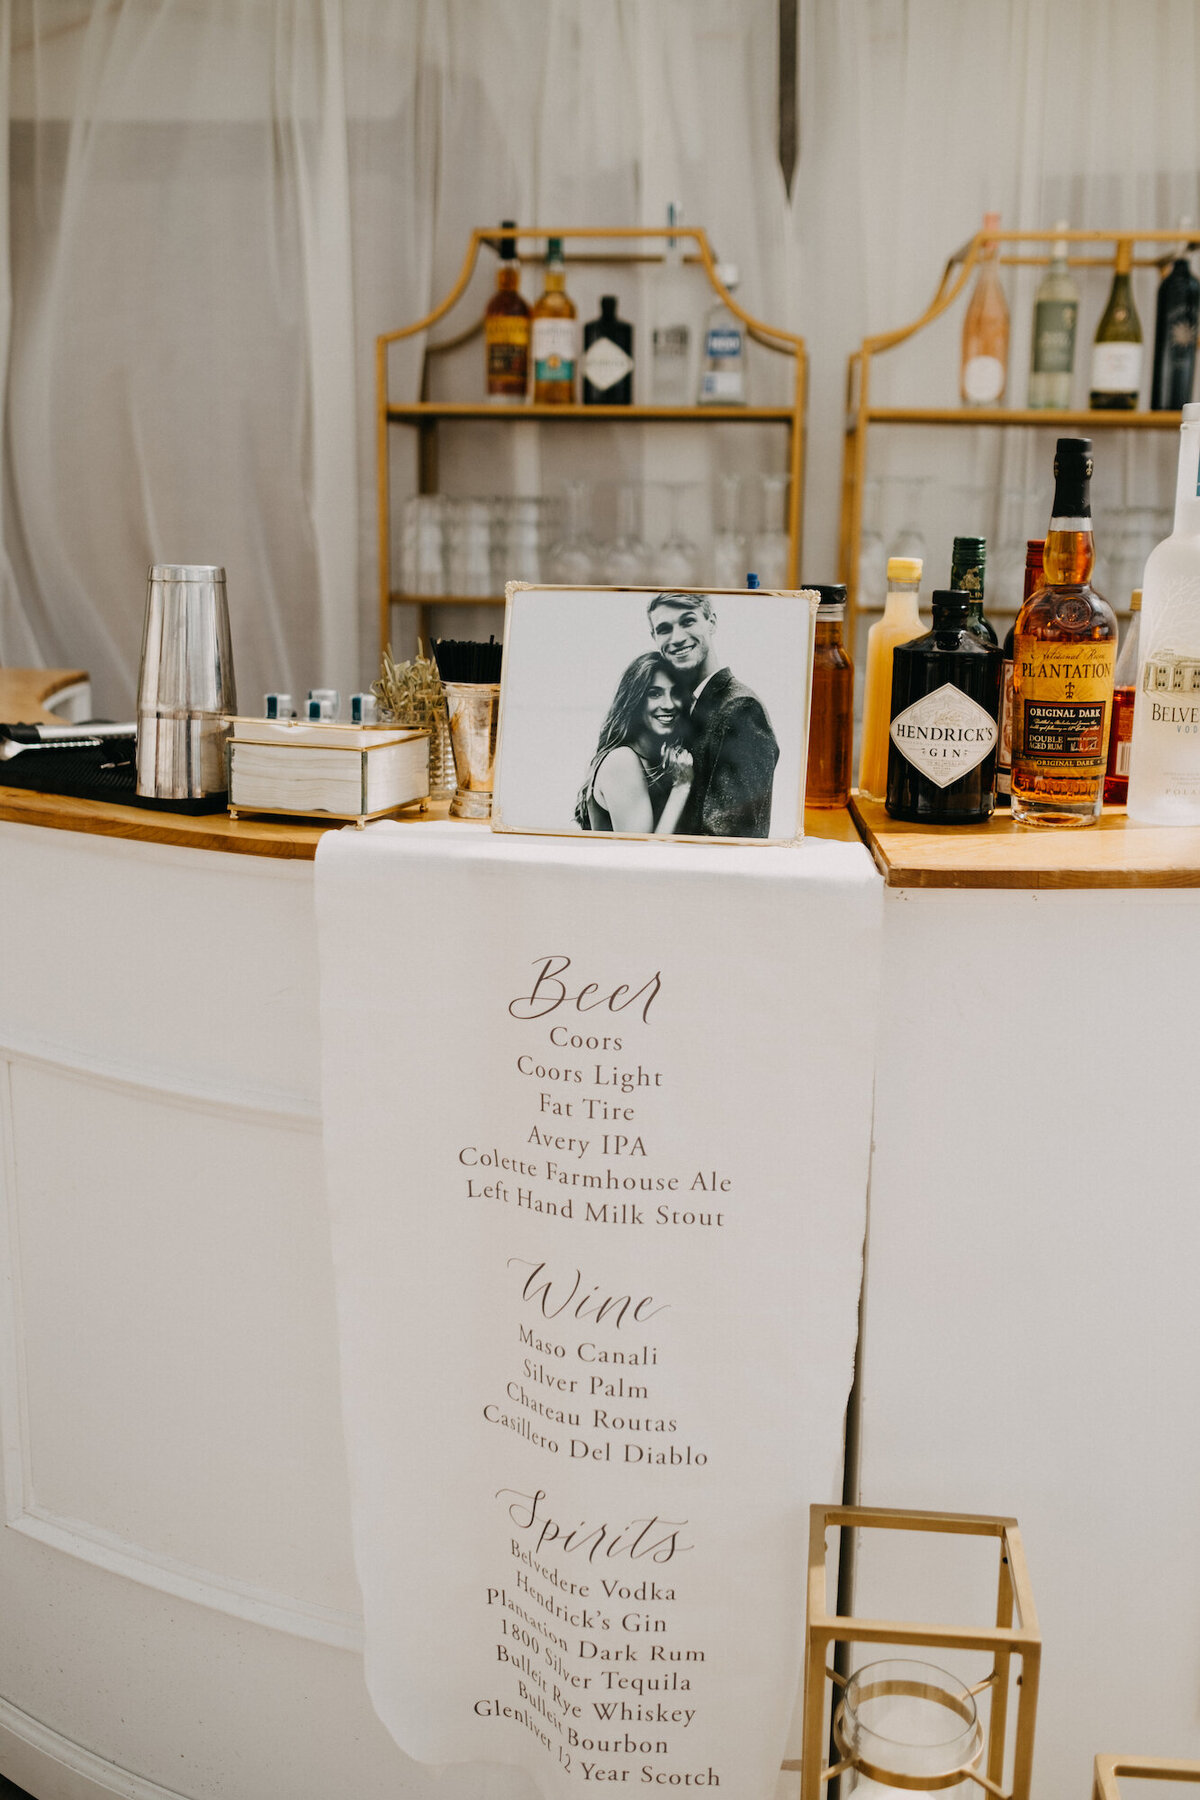 White fabric sign draped over bar